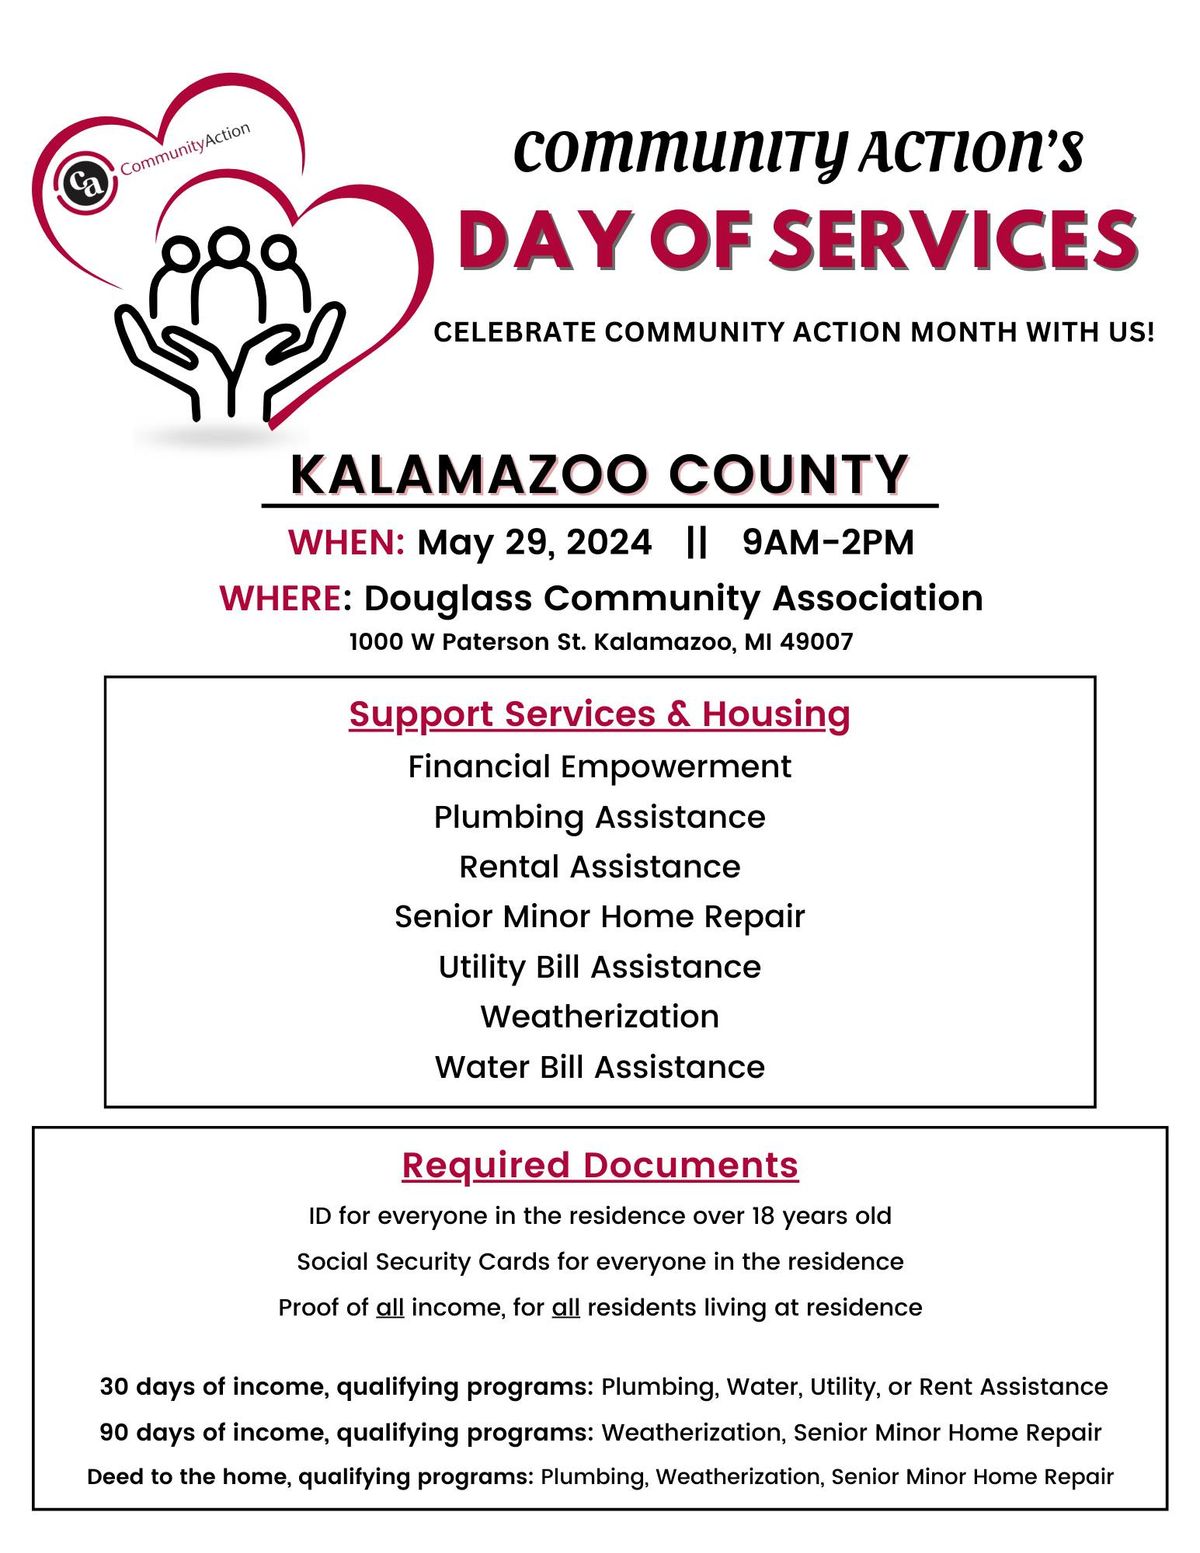 Day of Services by Community Action